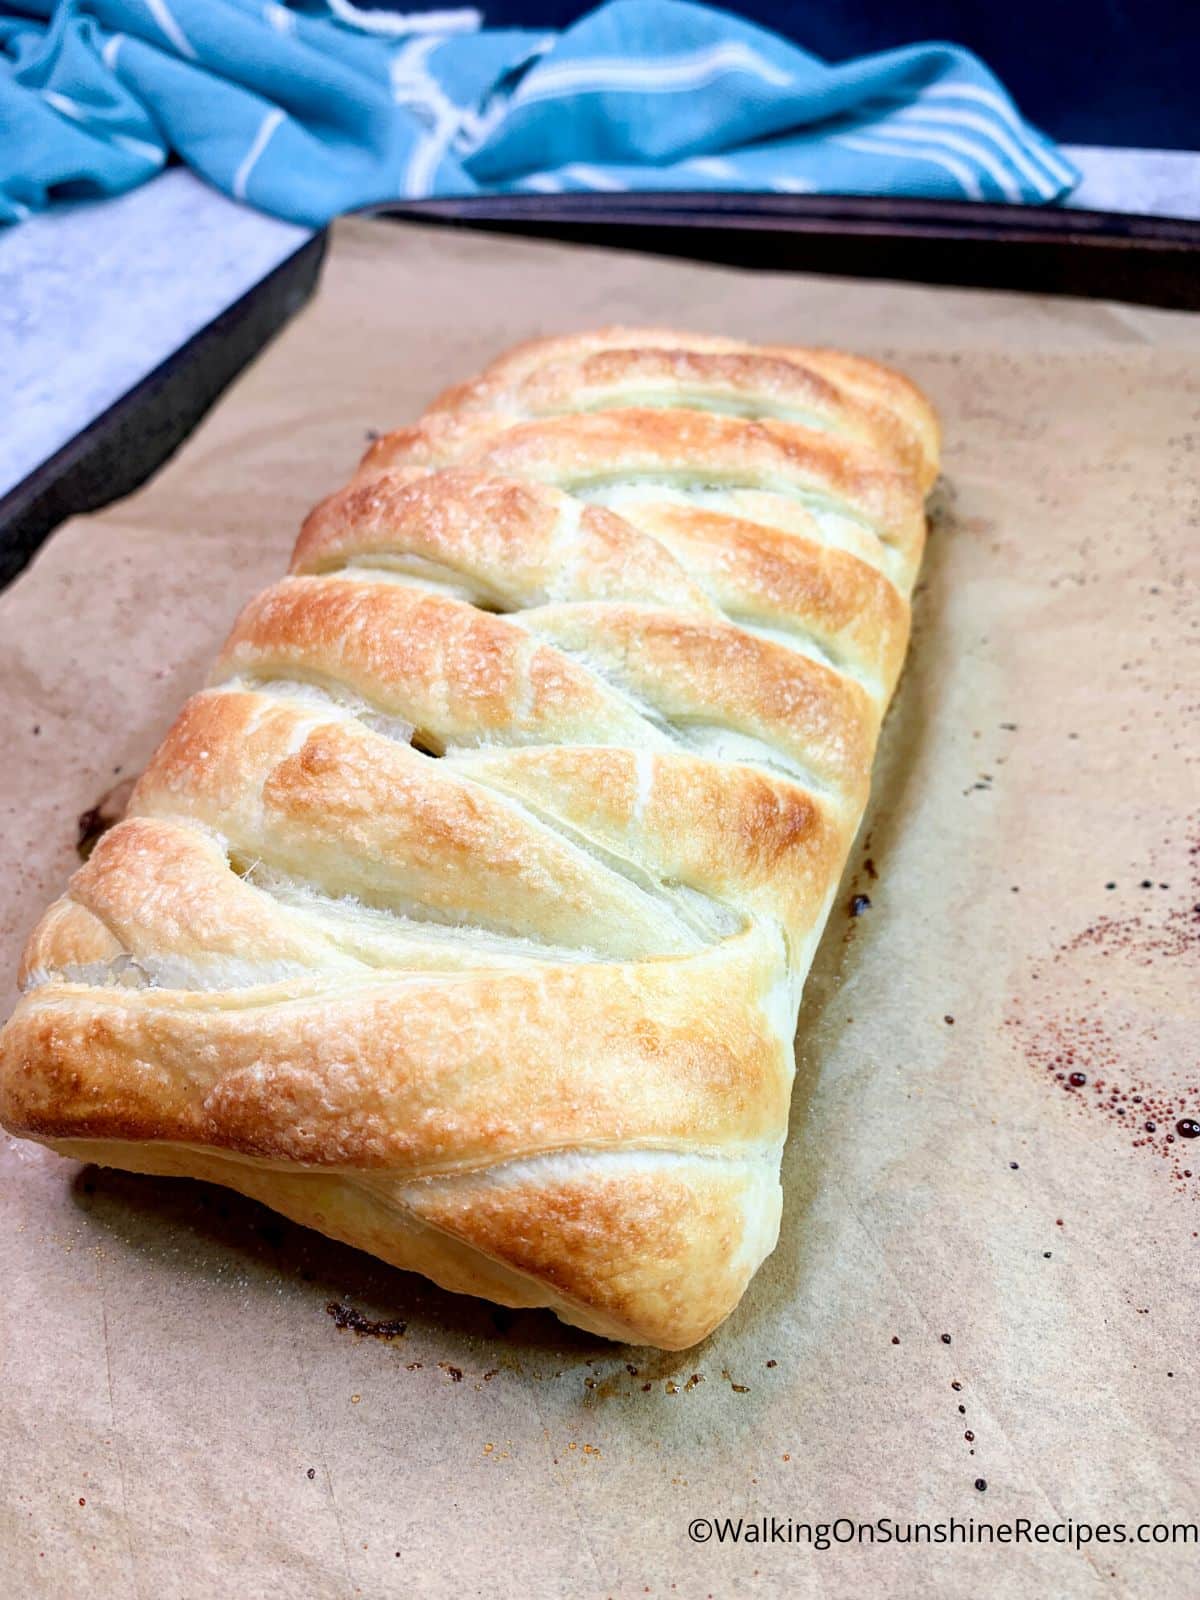 baked puff pastry braid on baking tray.